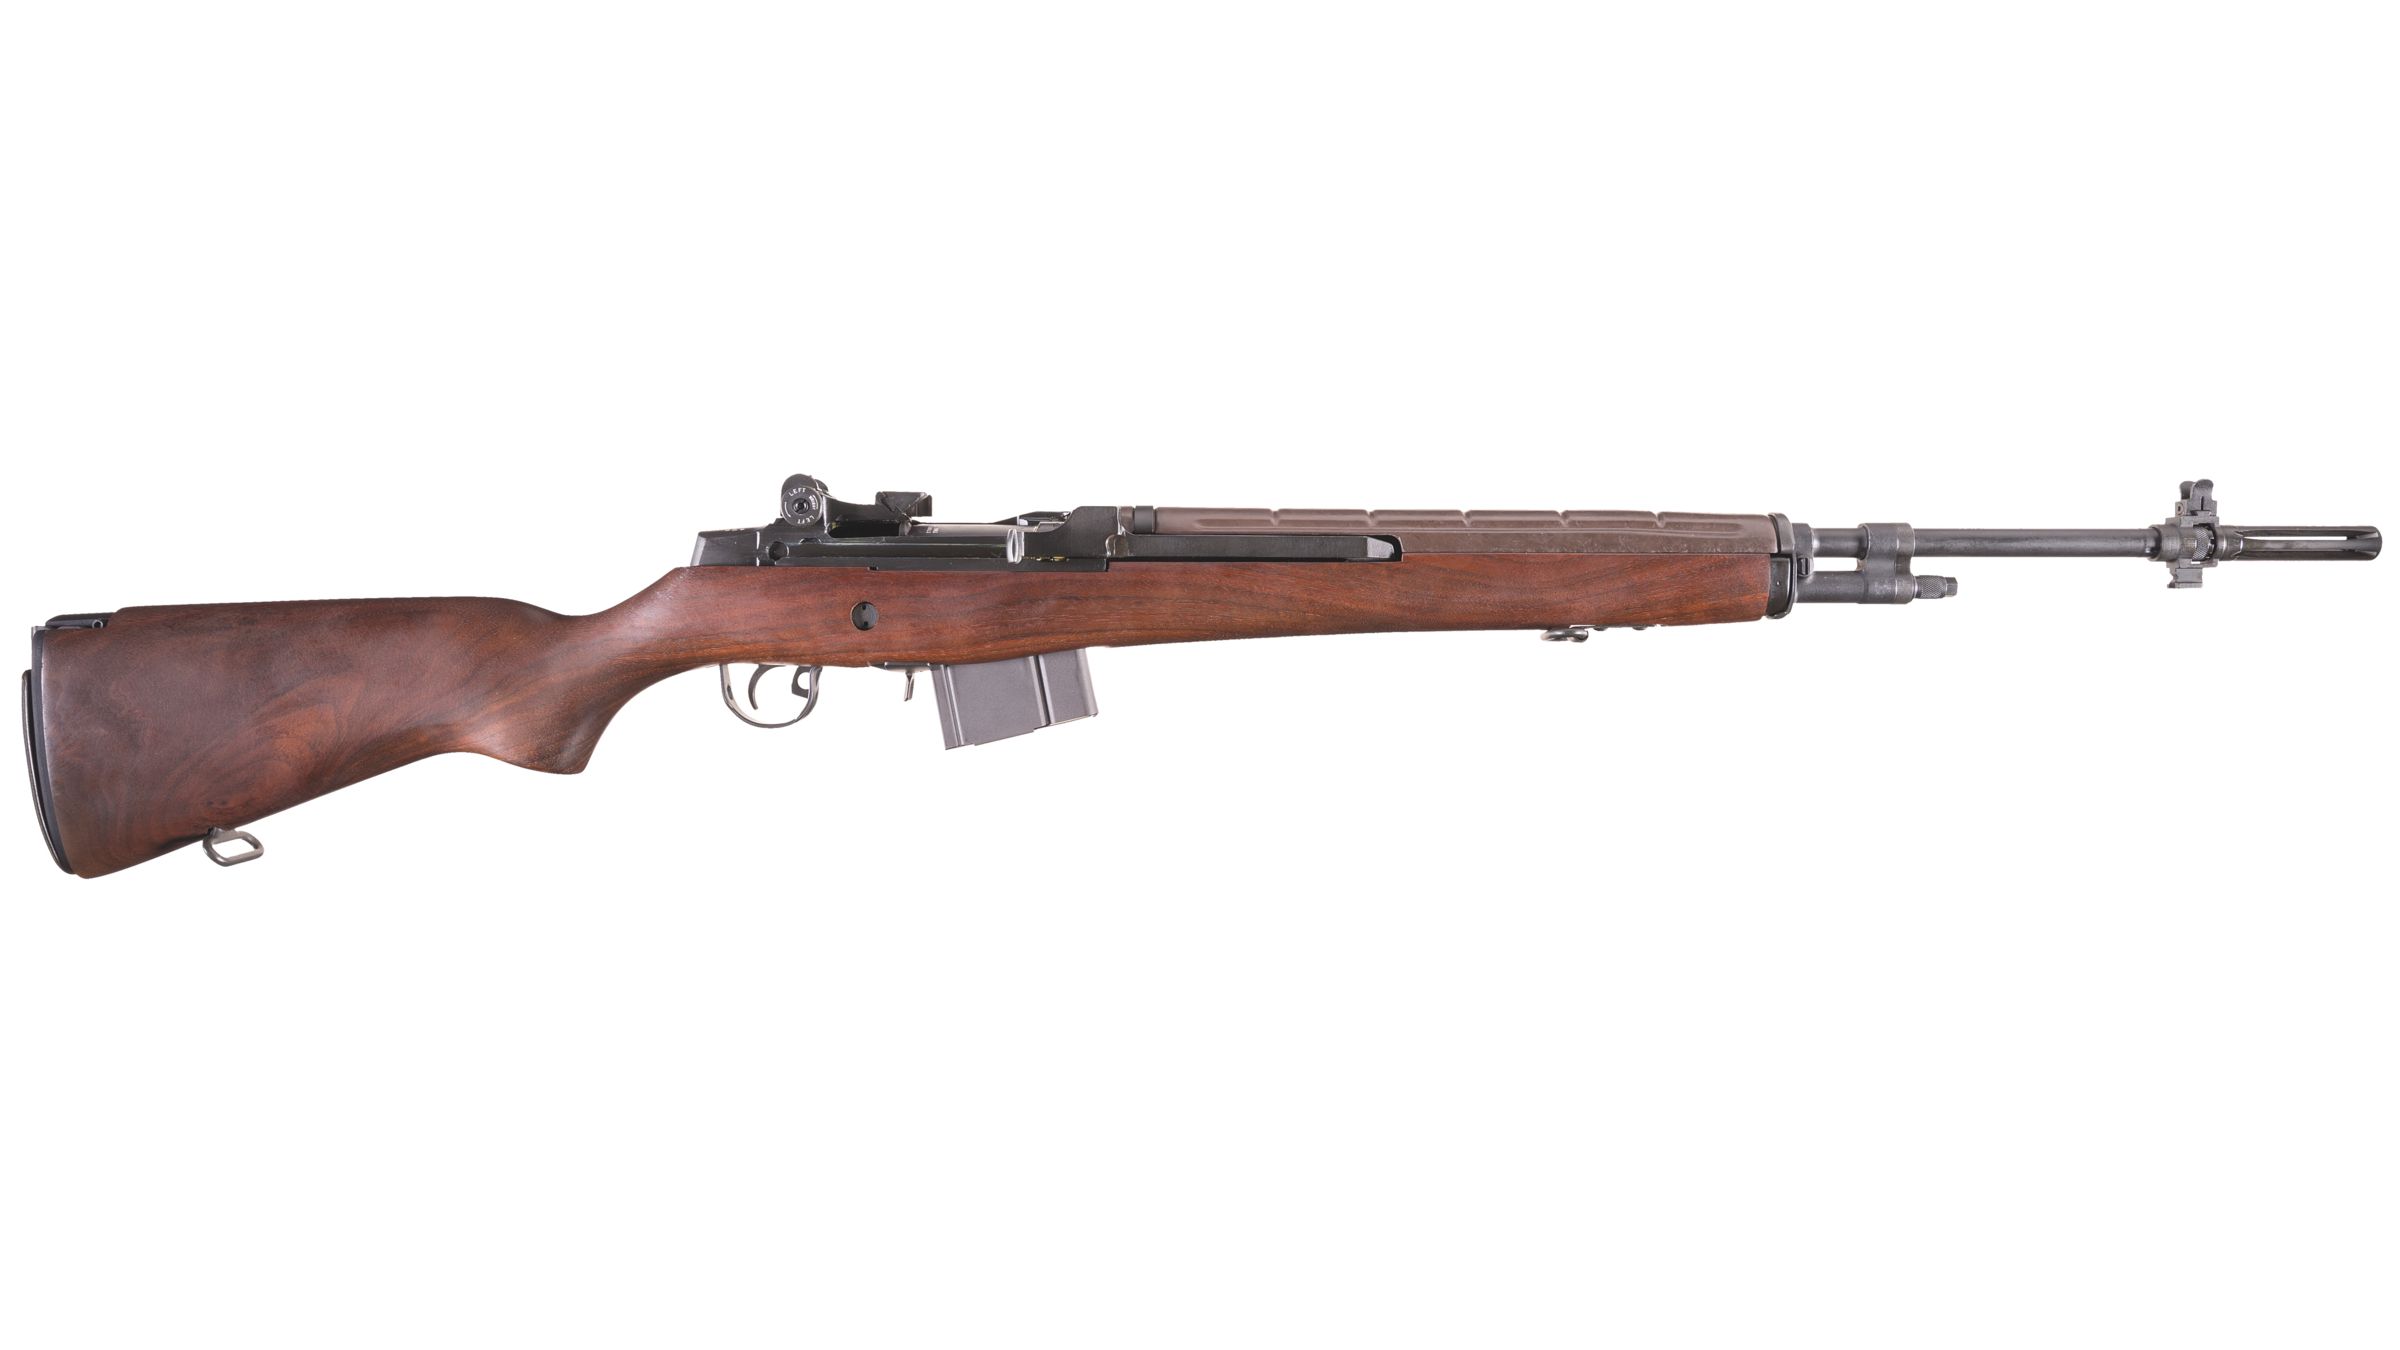 serial number dating springfield m1a